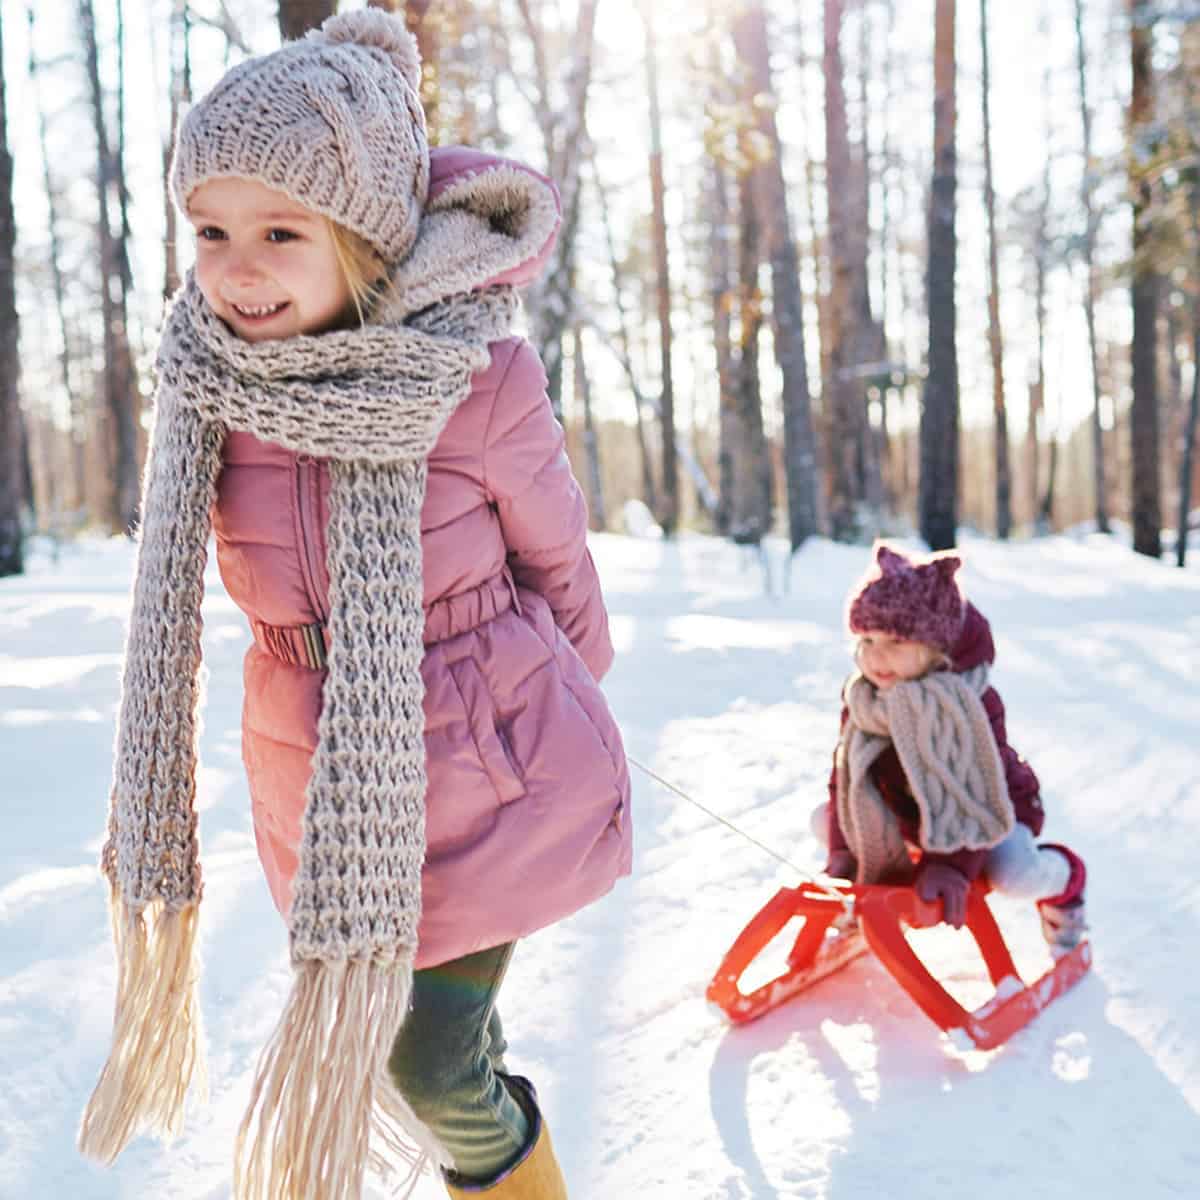 10 Winter Sensory Occupational Therapy Activities